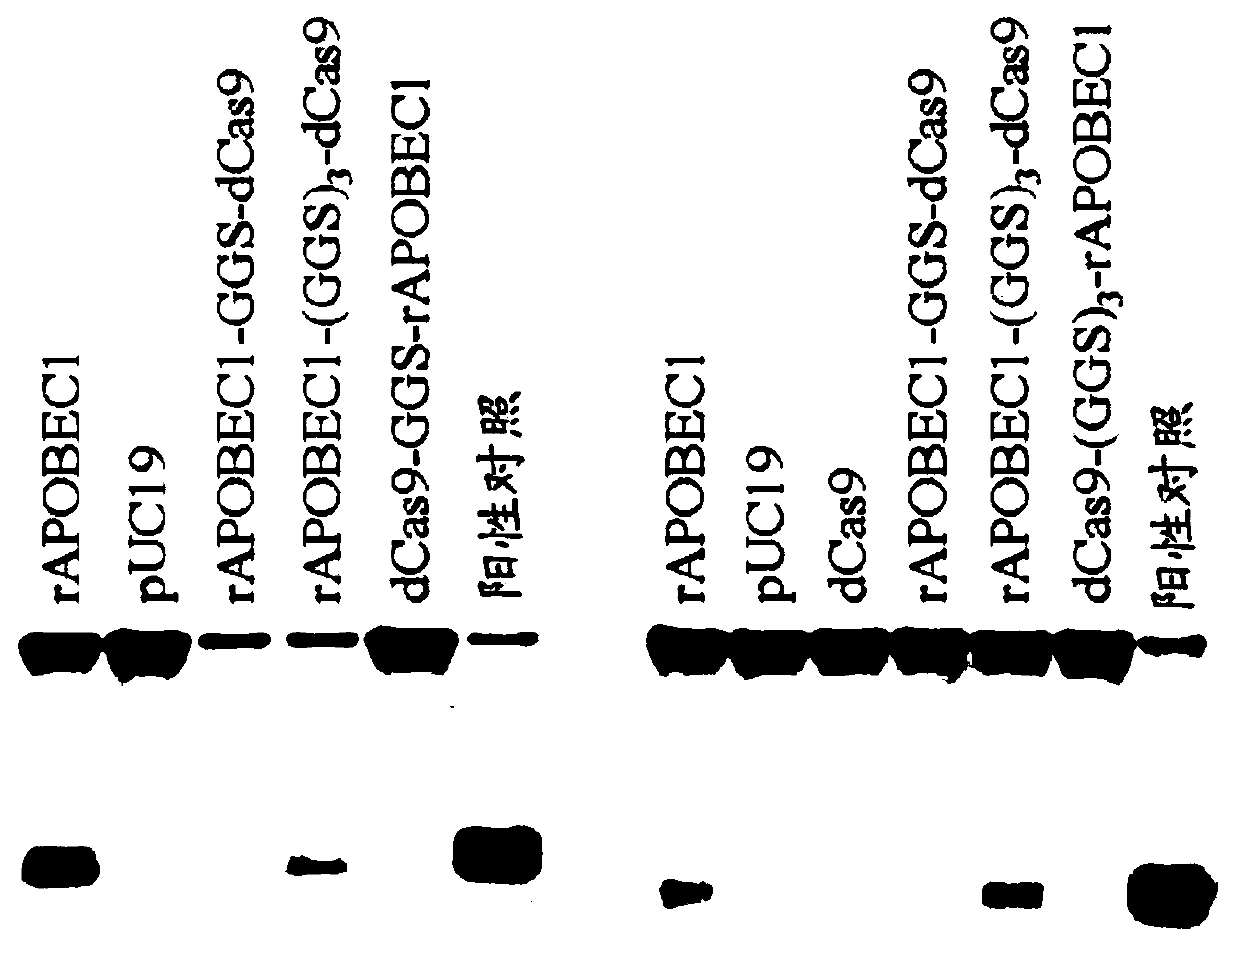 Nucleobase editors comprising nucleic acid programmable DNA binding proteins